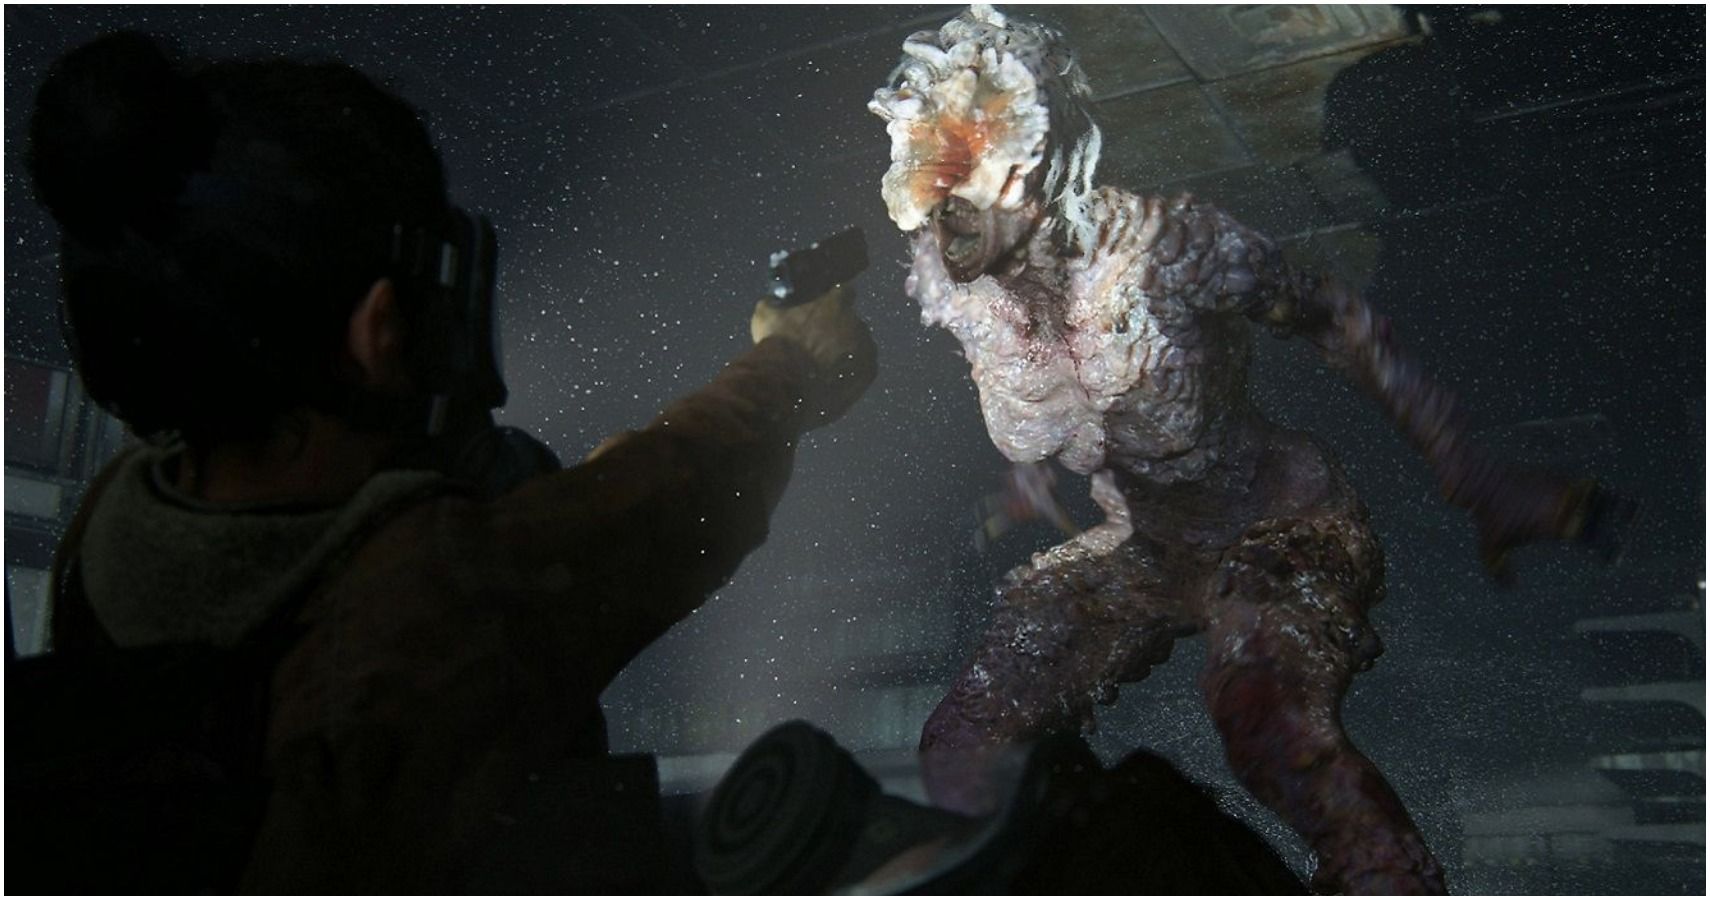 The Last of Us 2 Infected Types